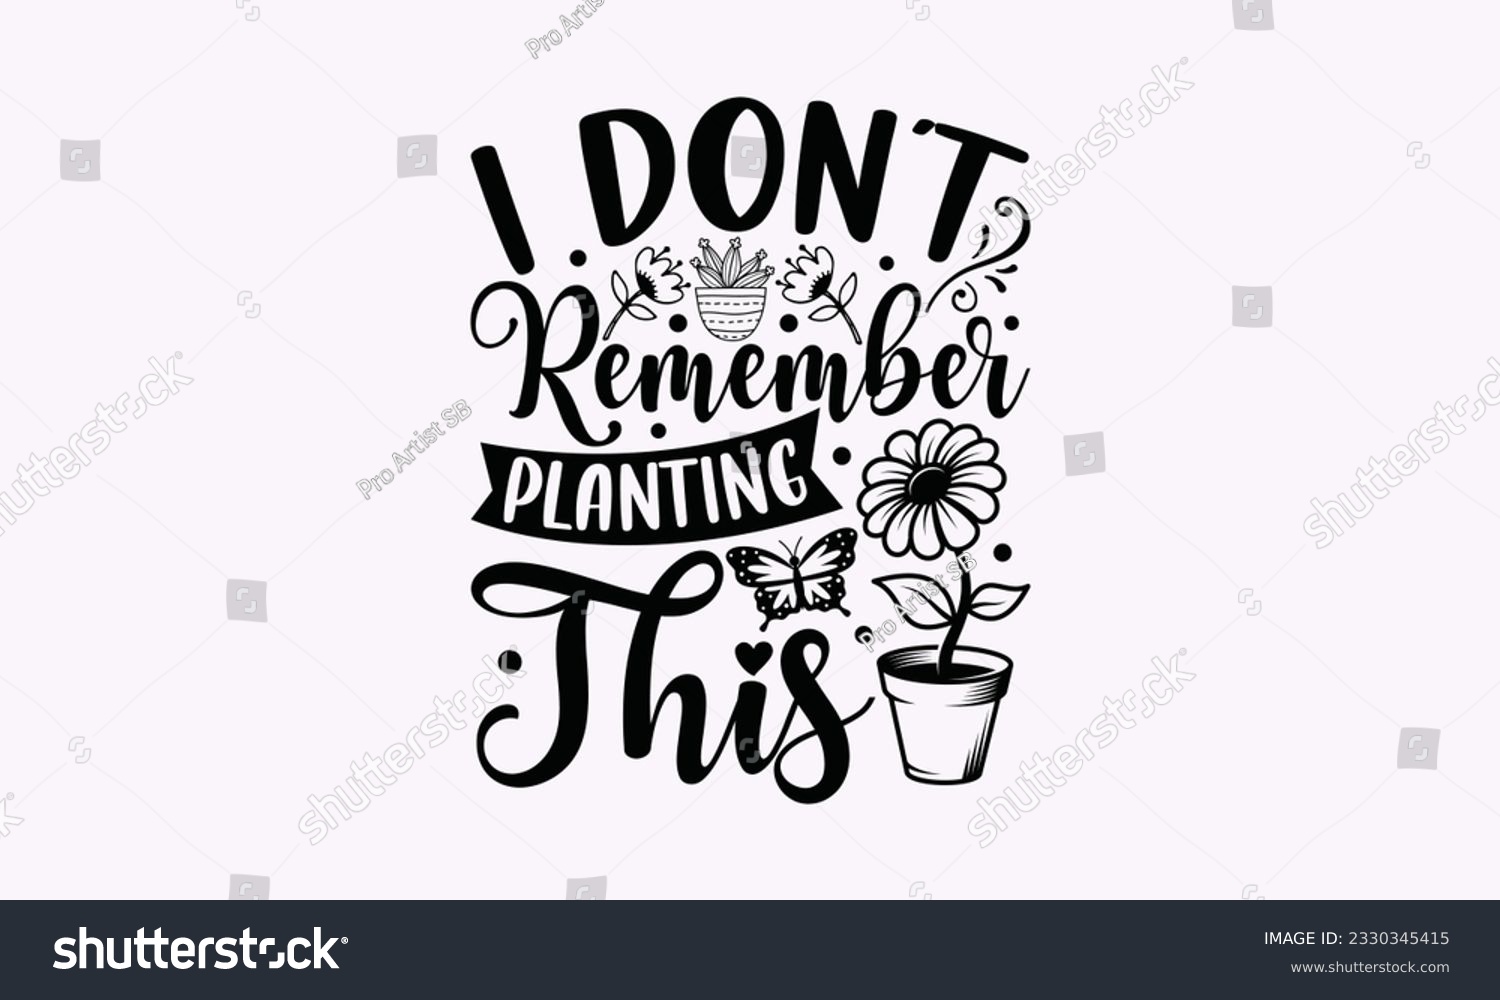 SVG of I don’t remember planting this - Gardening SVG Design, Flower Quotes, Calligraphy graphic design, Typography poster with old style camera and quote. svg